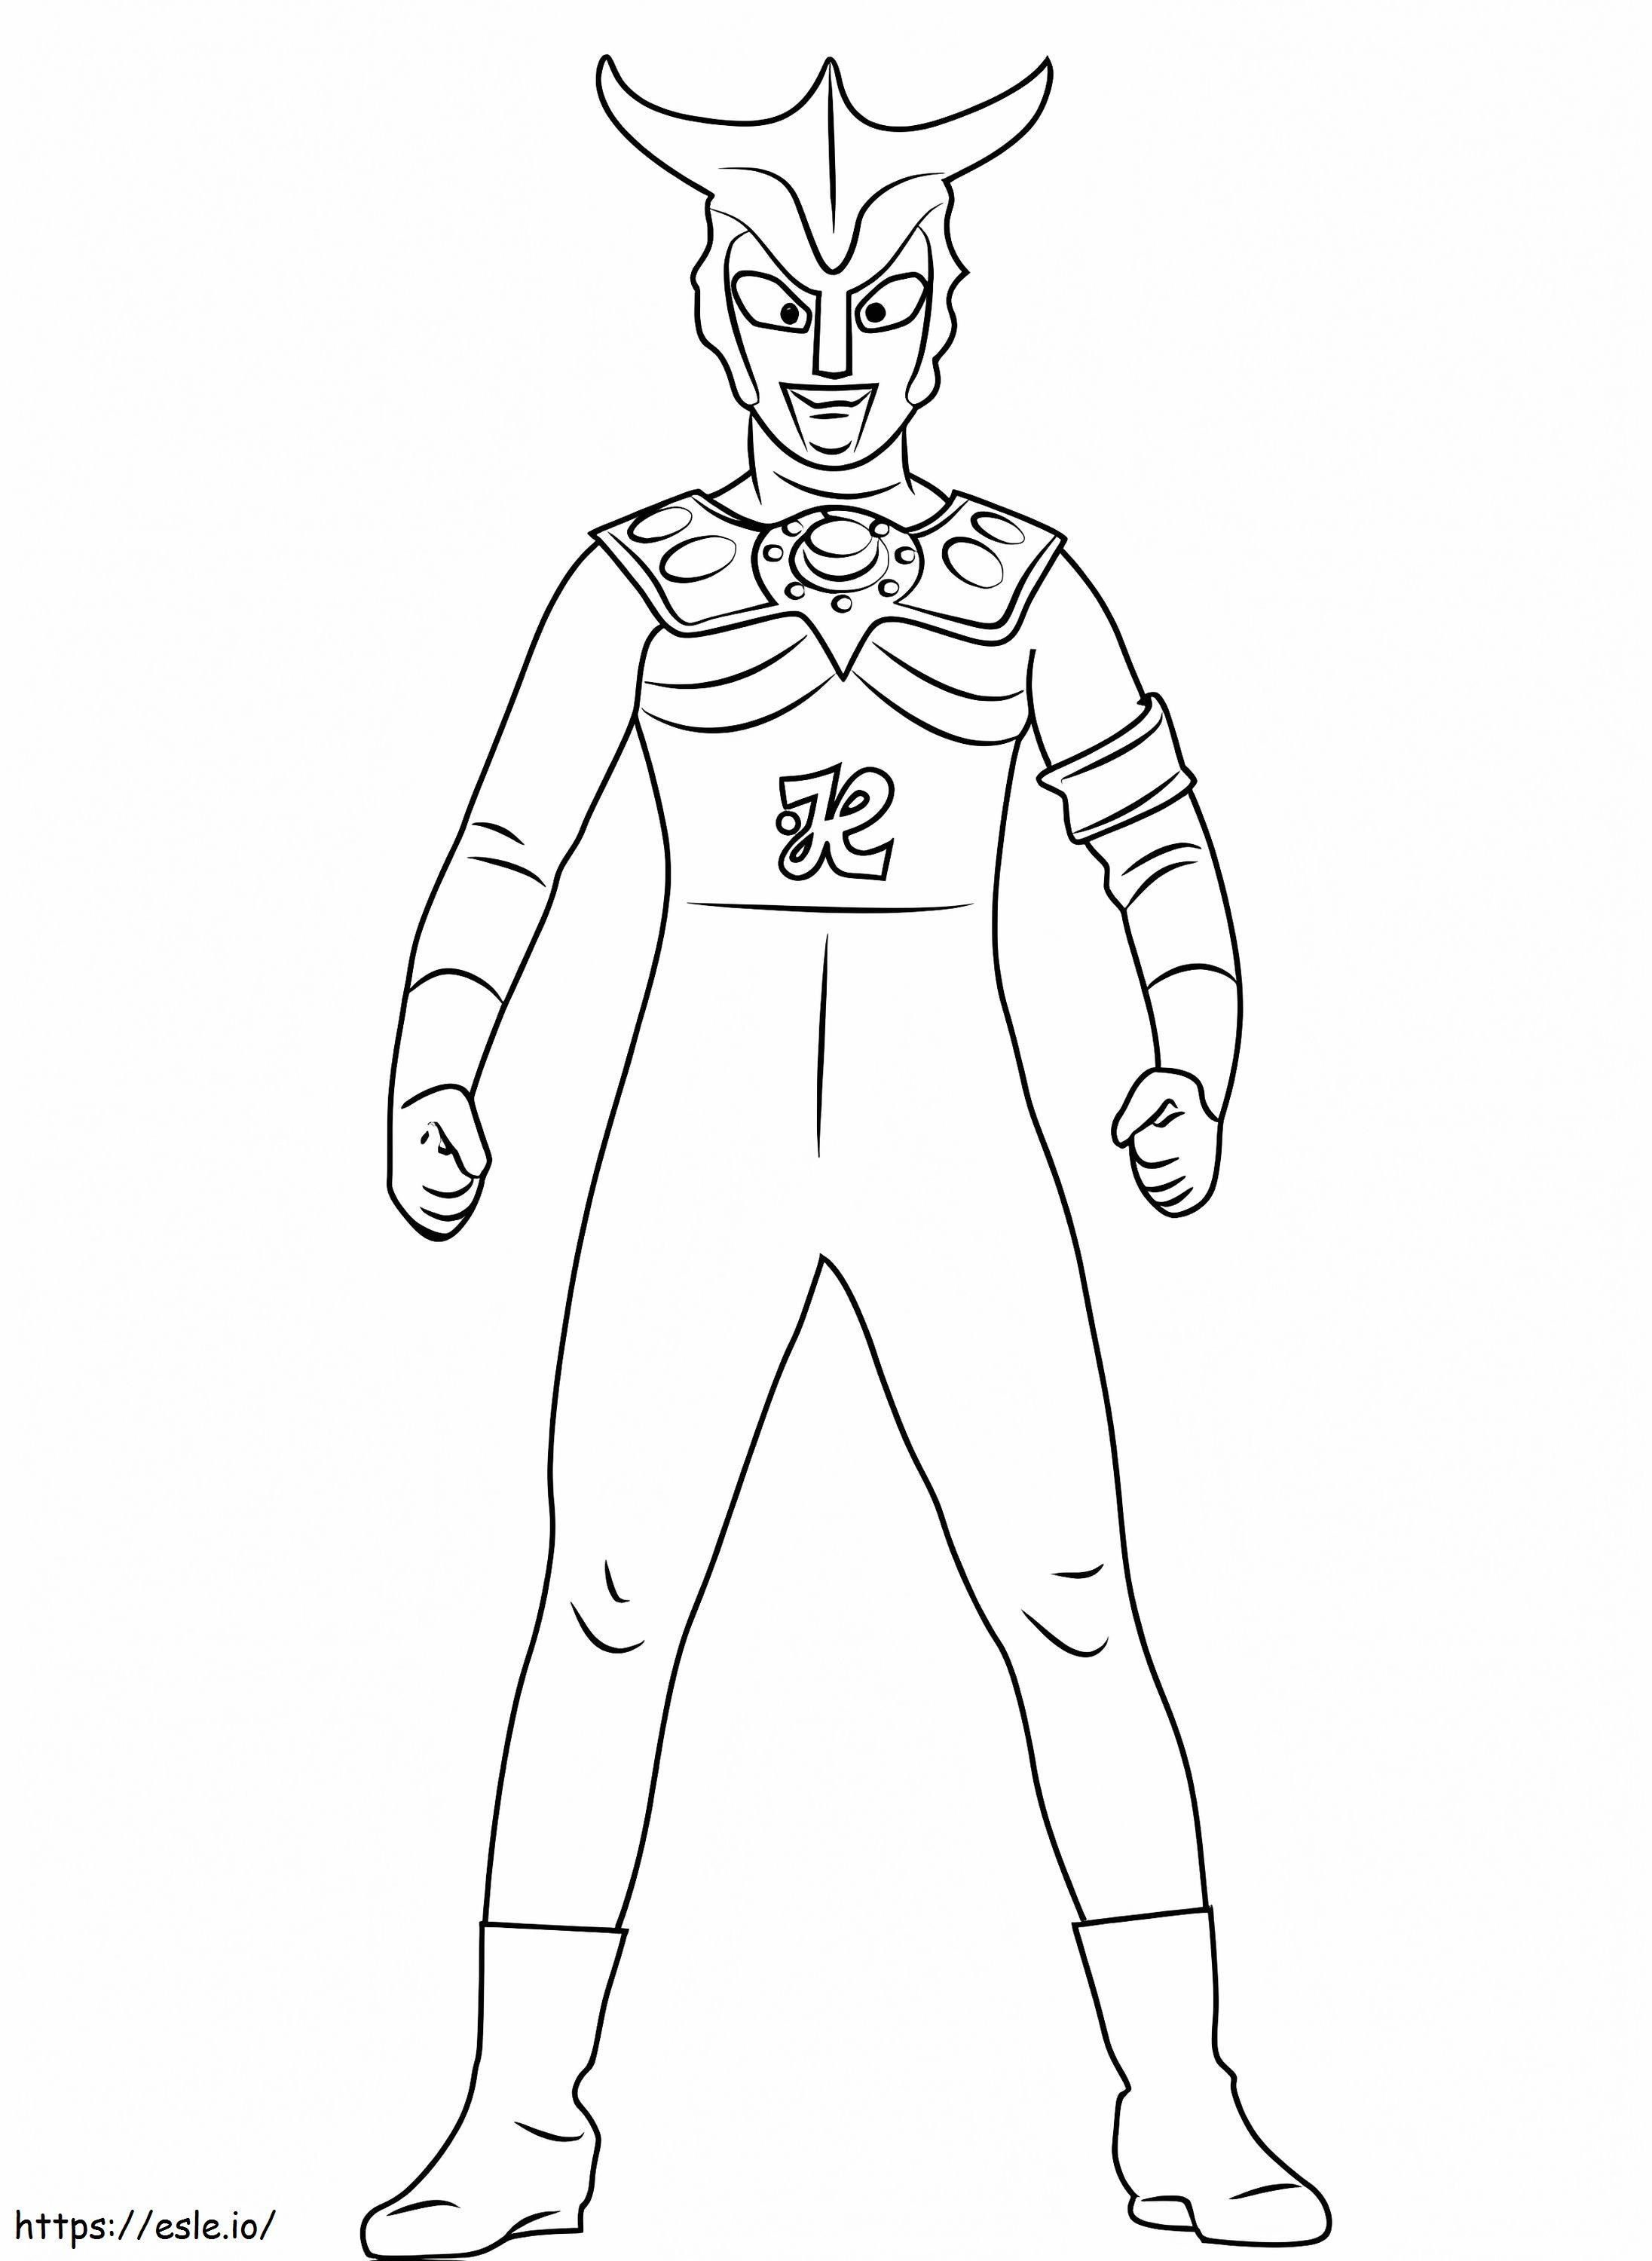 Ultraman 3 coloring page